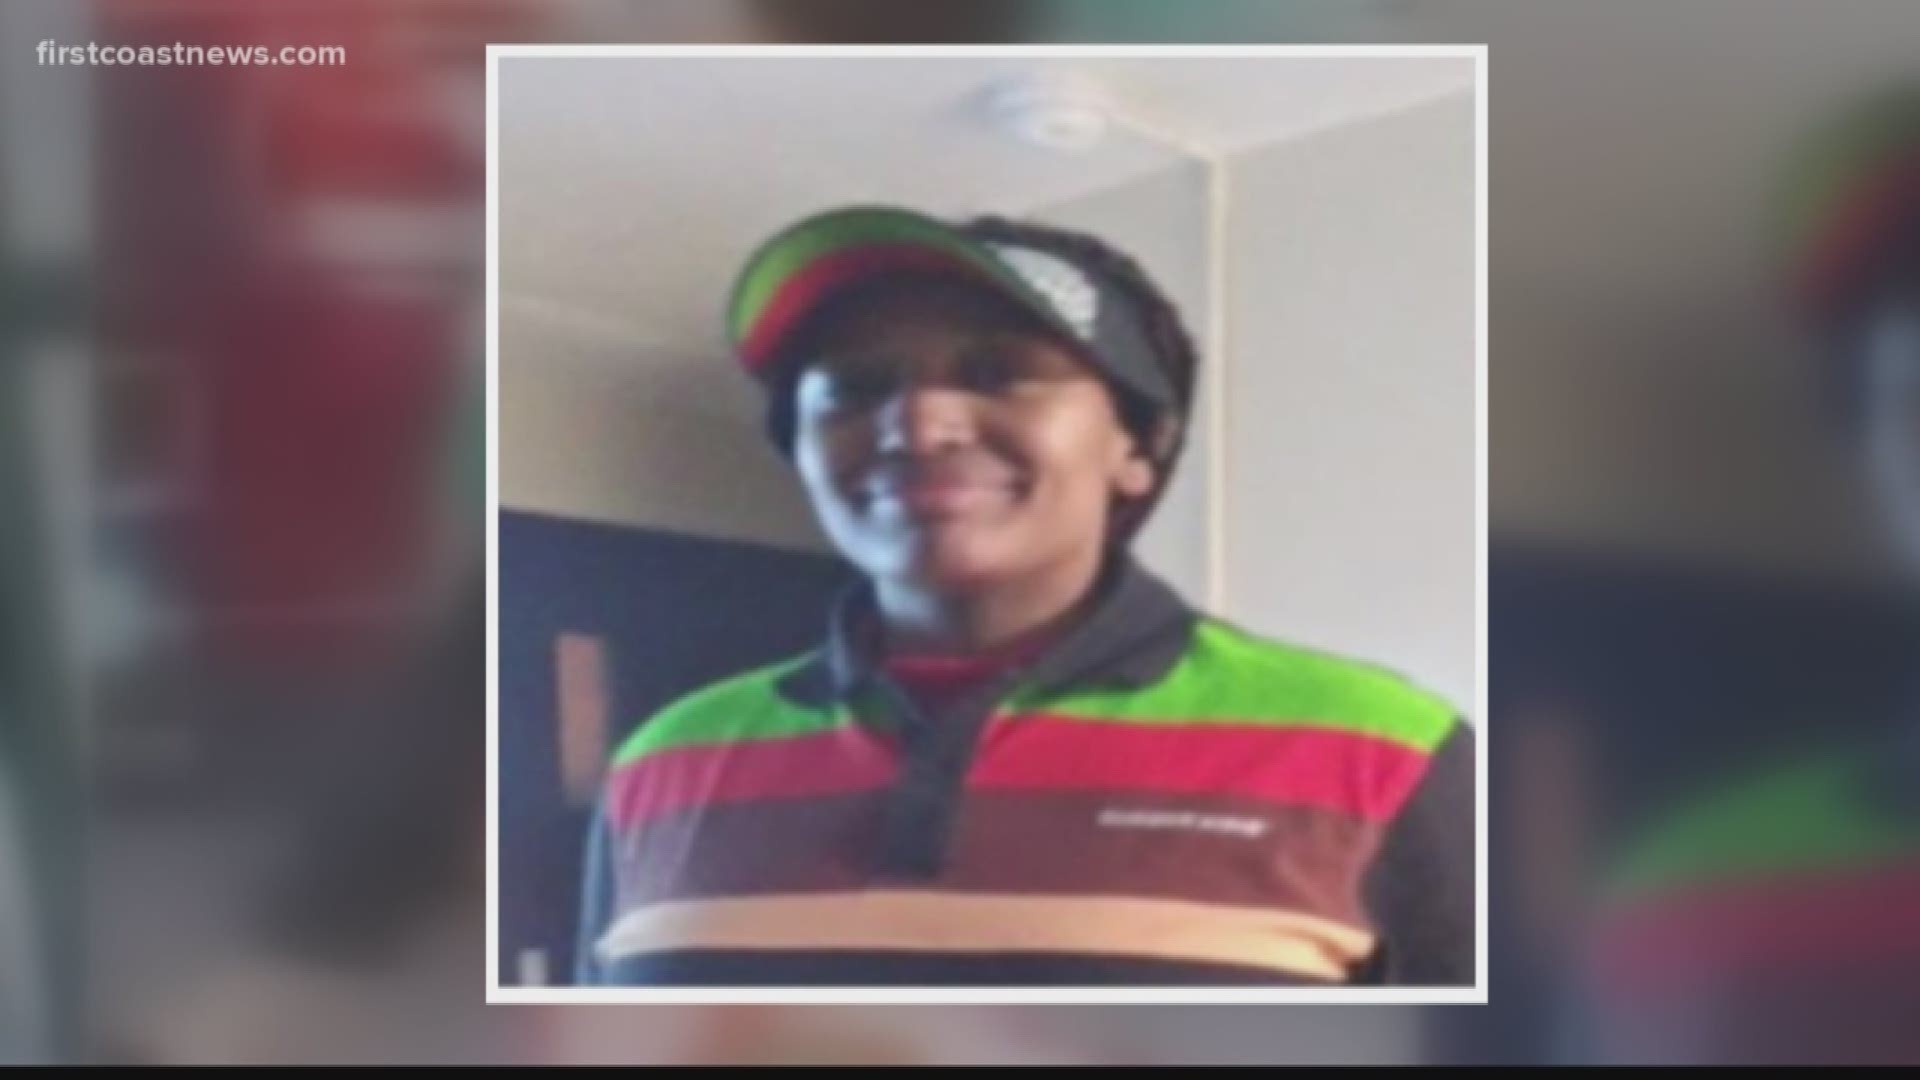 Asha Carter was reported missing on Friday around 3 a.m. She's described as being 5'6, 150 lbs.